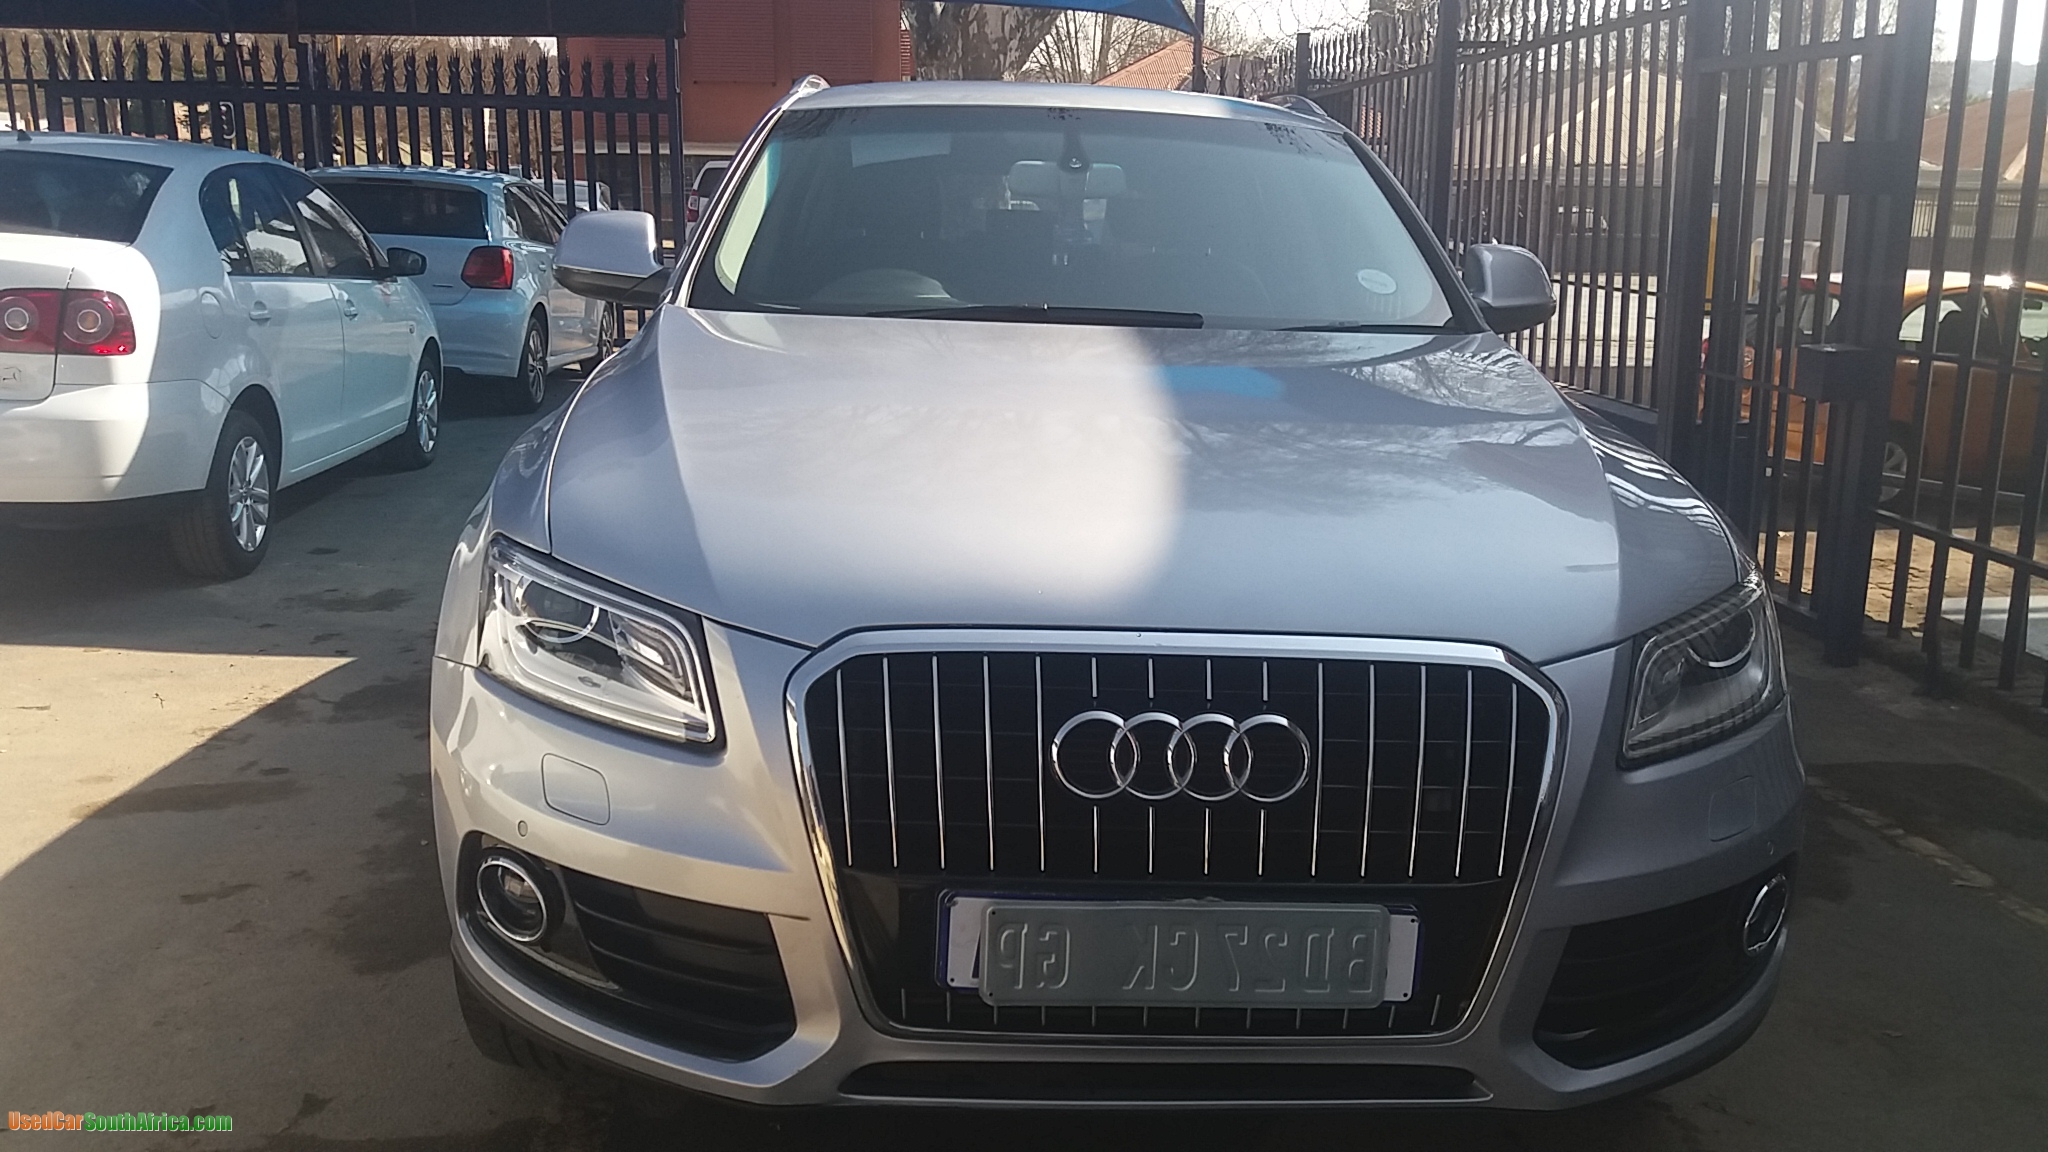 2015 Audi Q5 TDI Quattro used car for sale in Johannesburg City Gauteng South Africa - OnlyCars.co.za